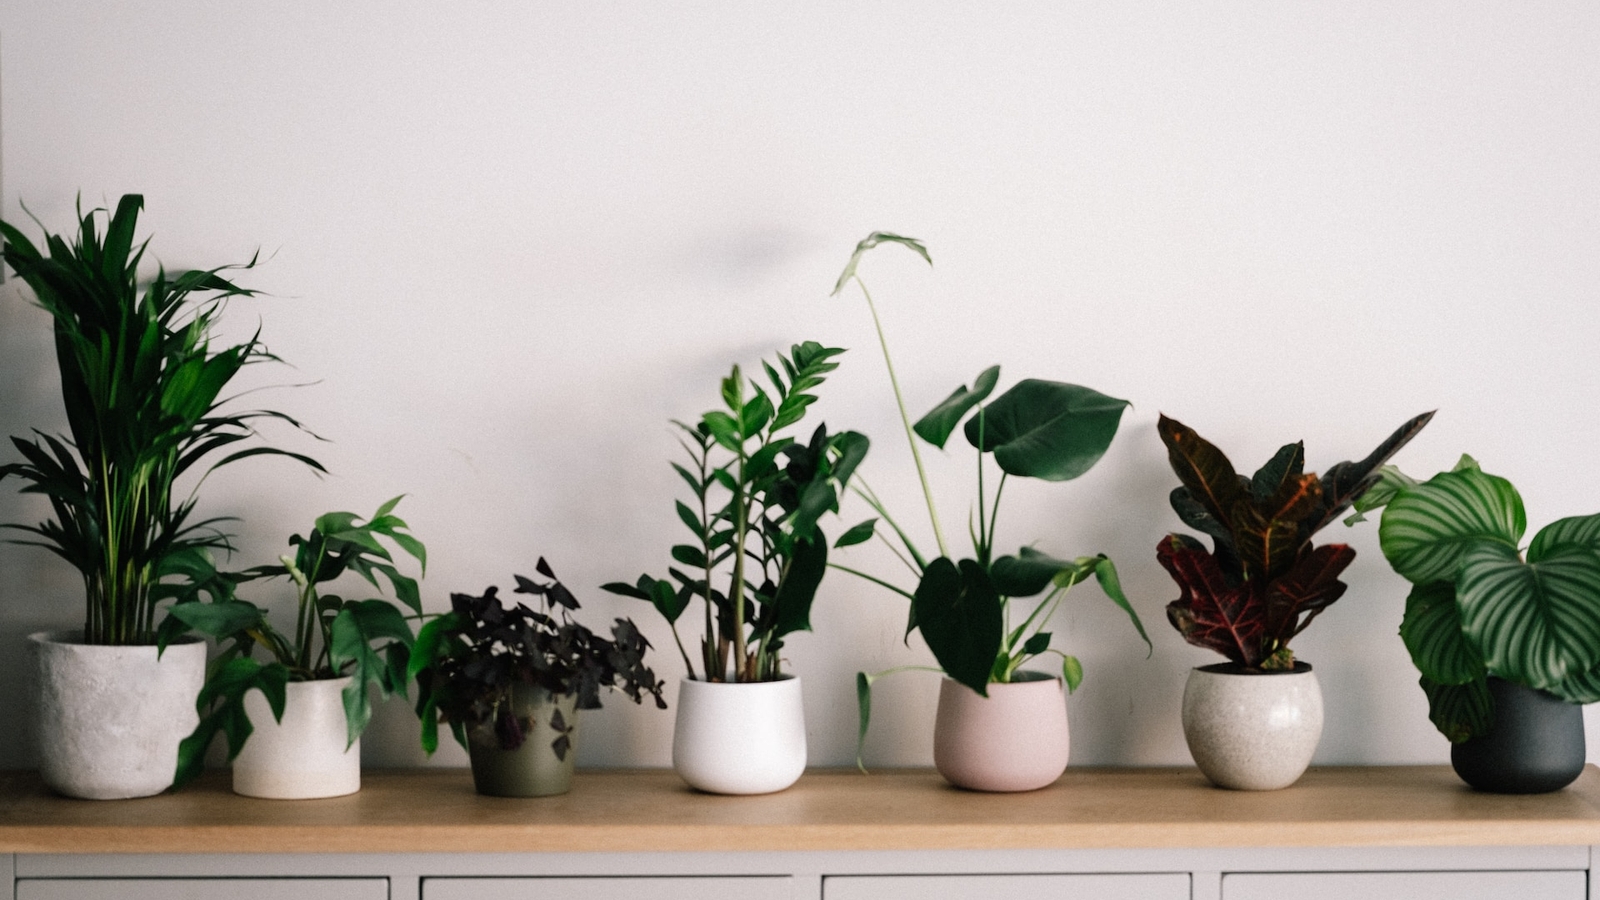 A row of plants on a countertop